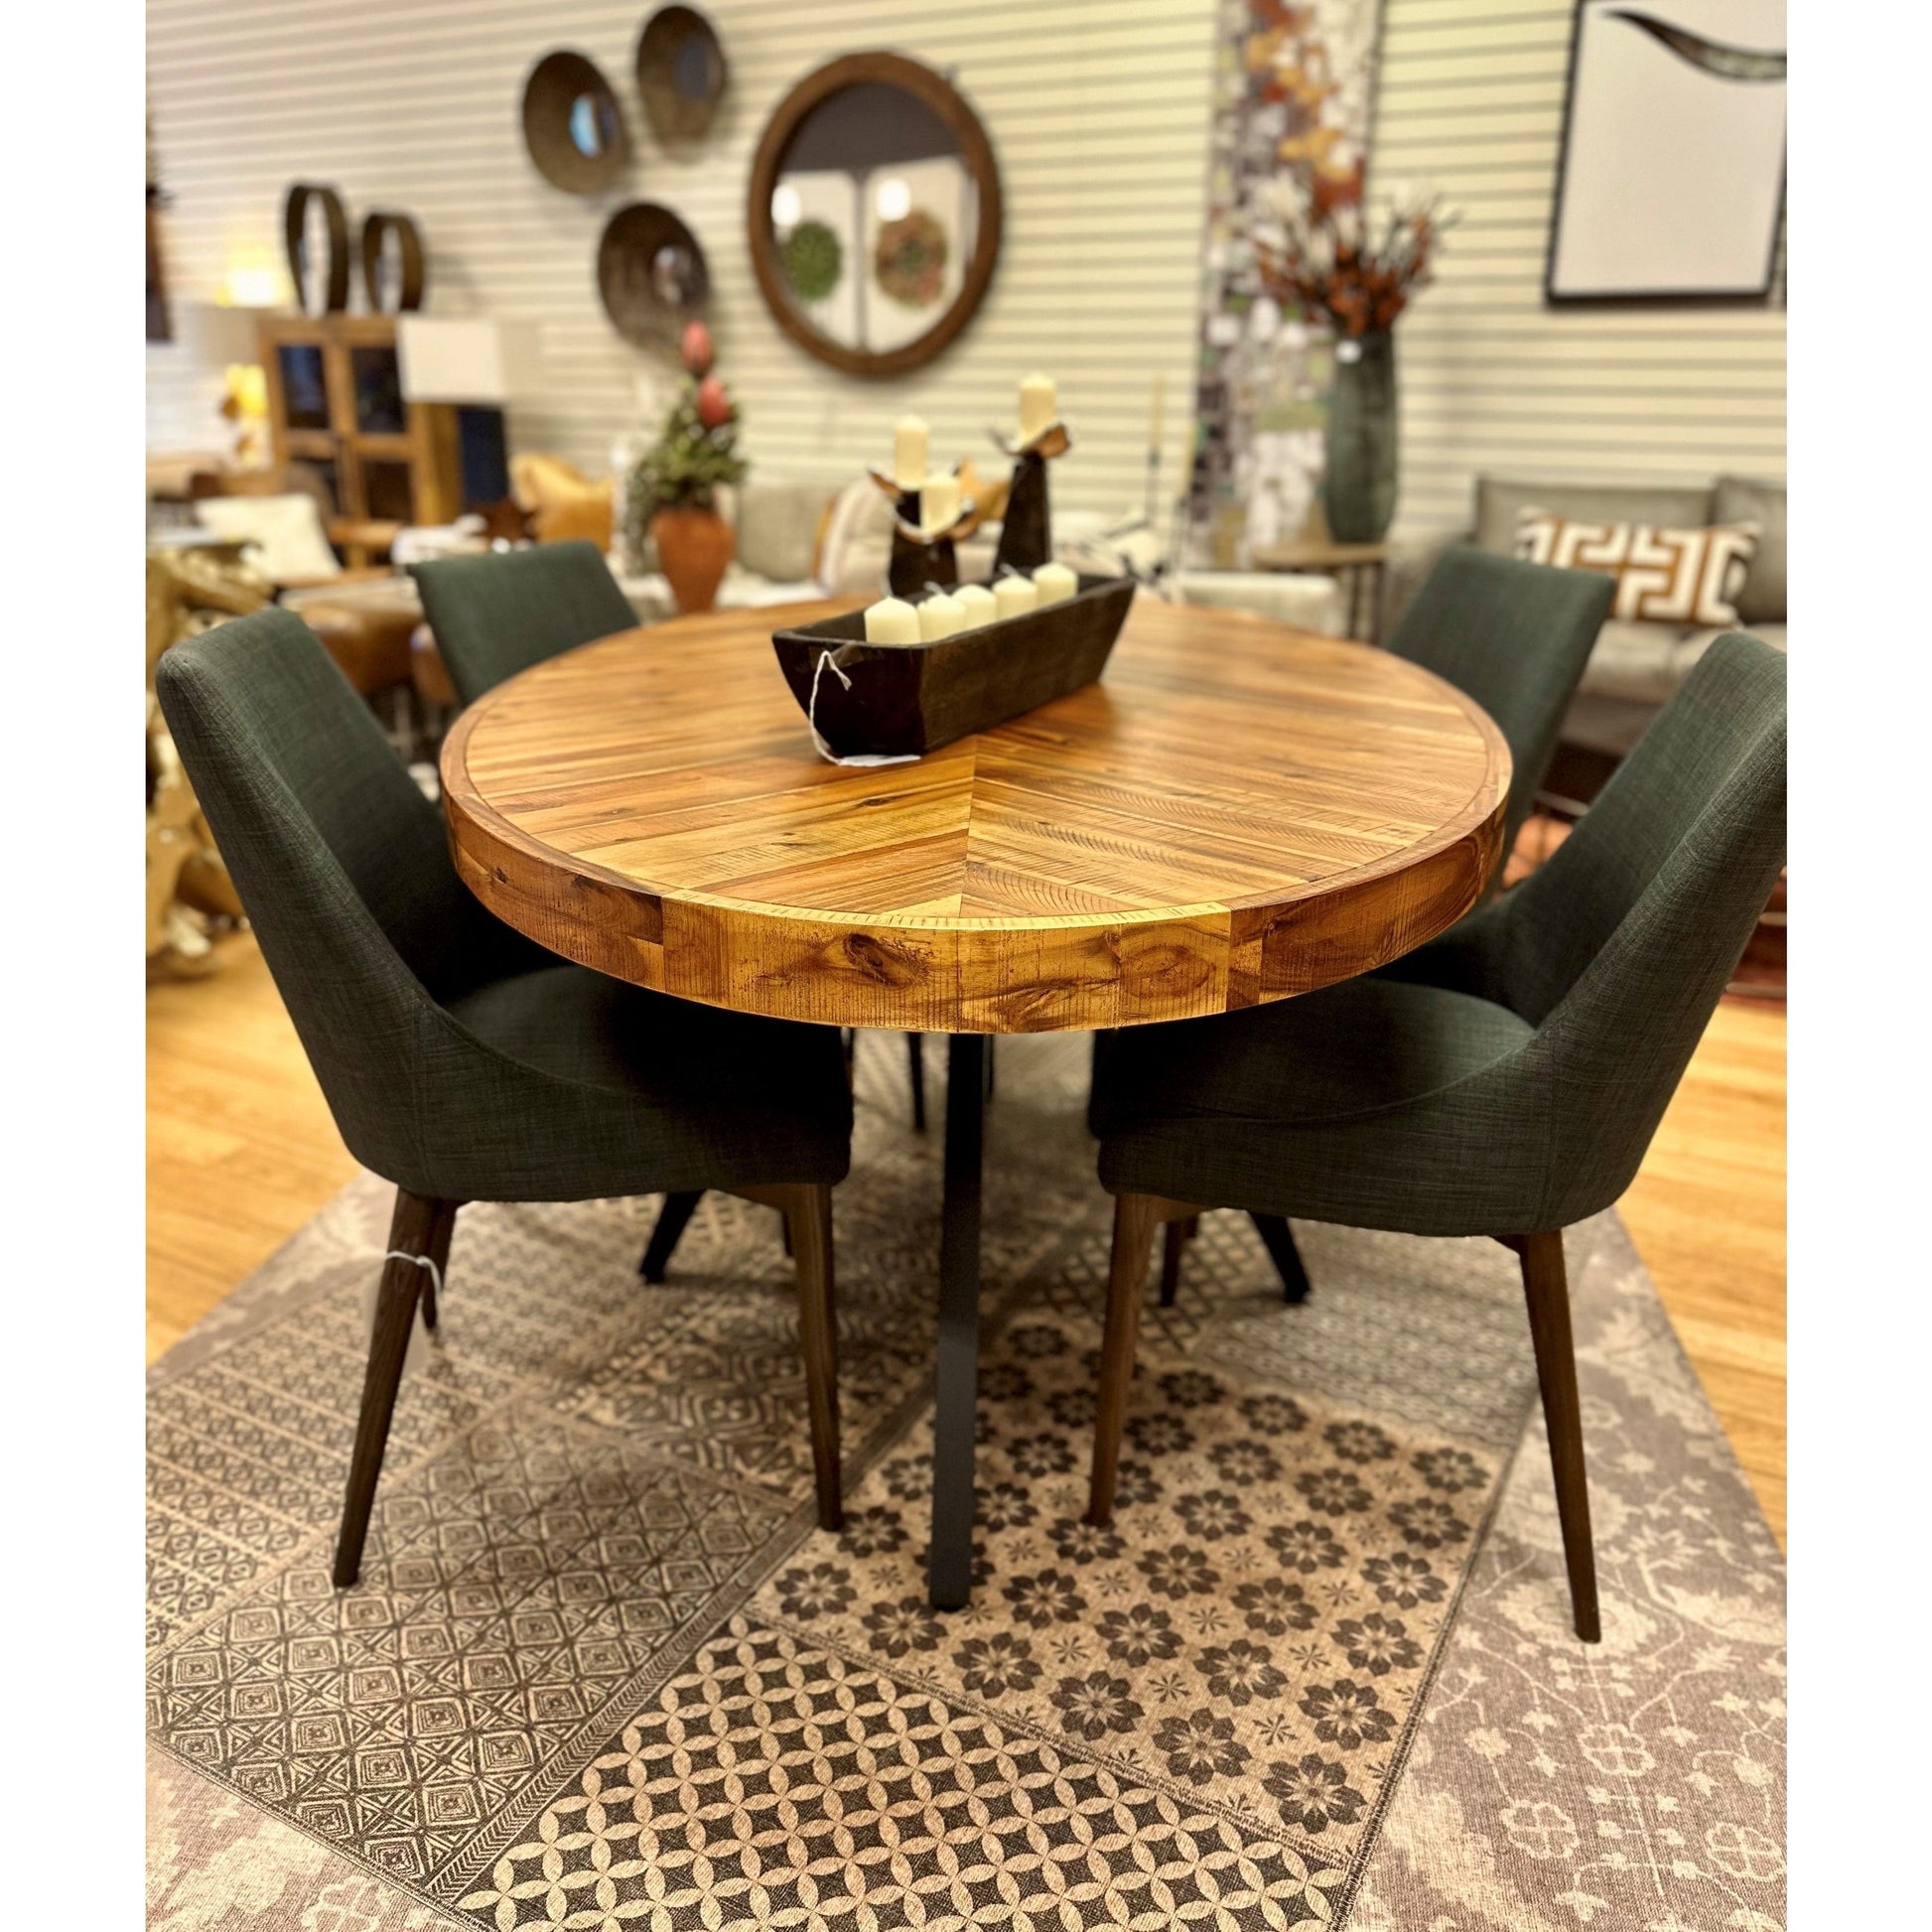 A round wooden dining table with a geometric pattern on its surface is surrounded by four Franny Dining Chairs, Dark Gray, upholstered with removable covers. The table sits on a patterned rug. In the background, various wall decor items, plants, and furniture pieces contribute to a cozy and stylish ambiance.